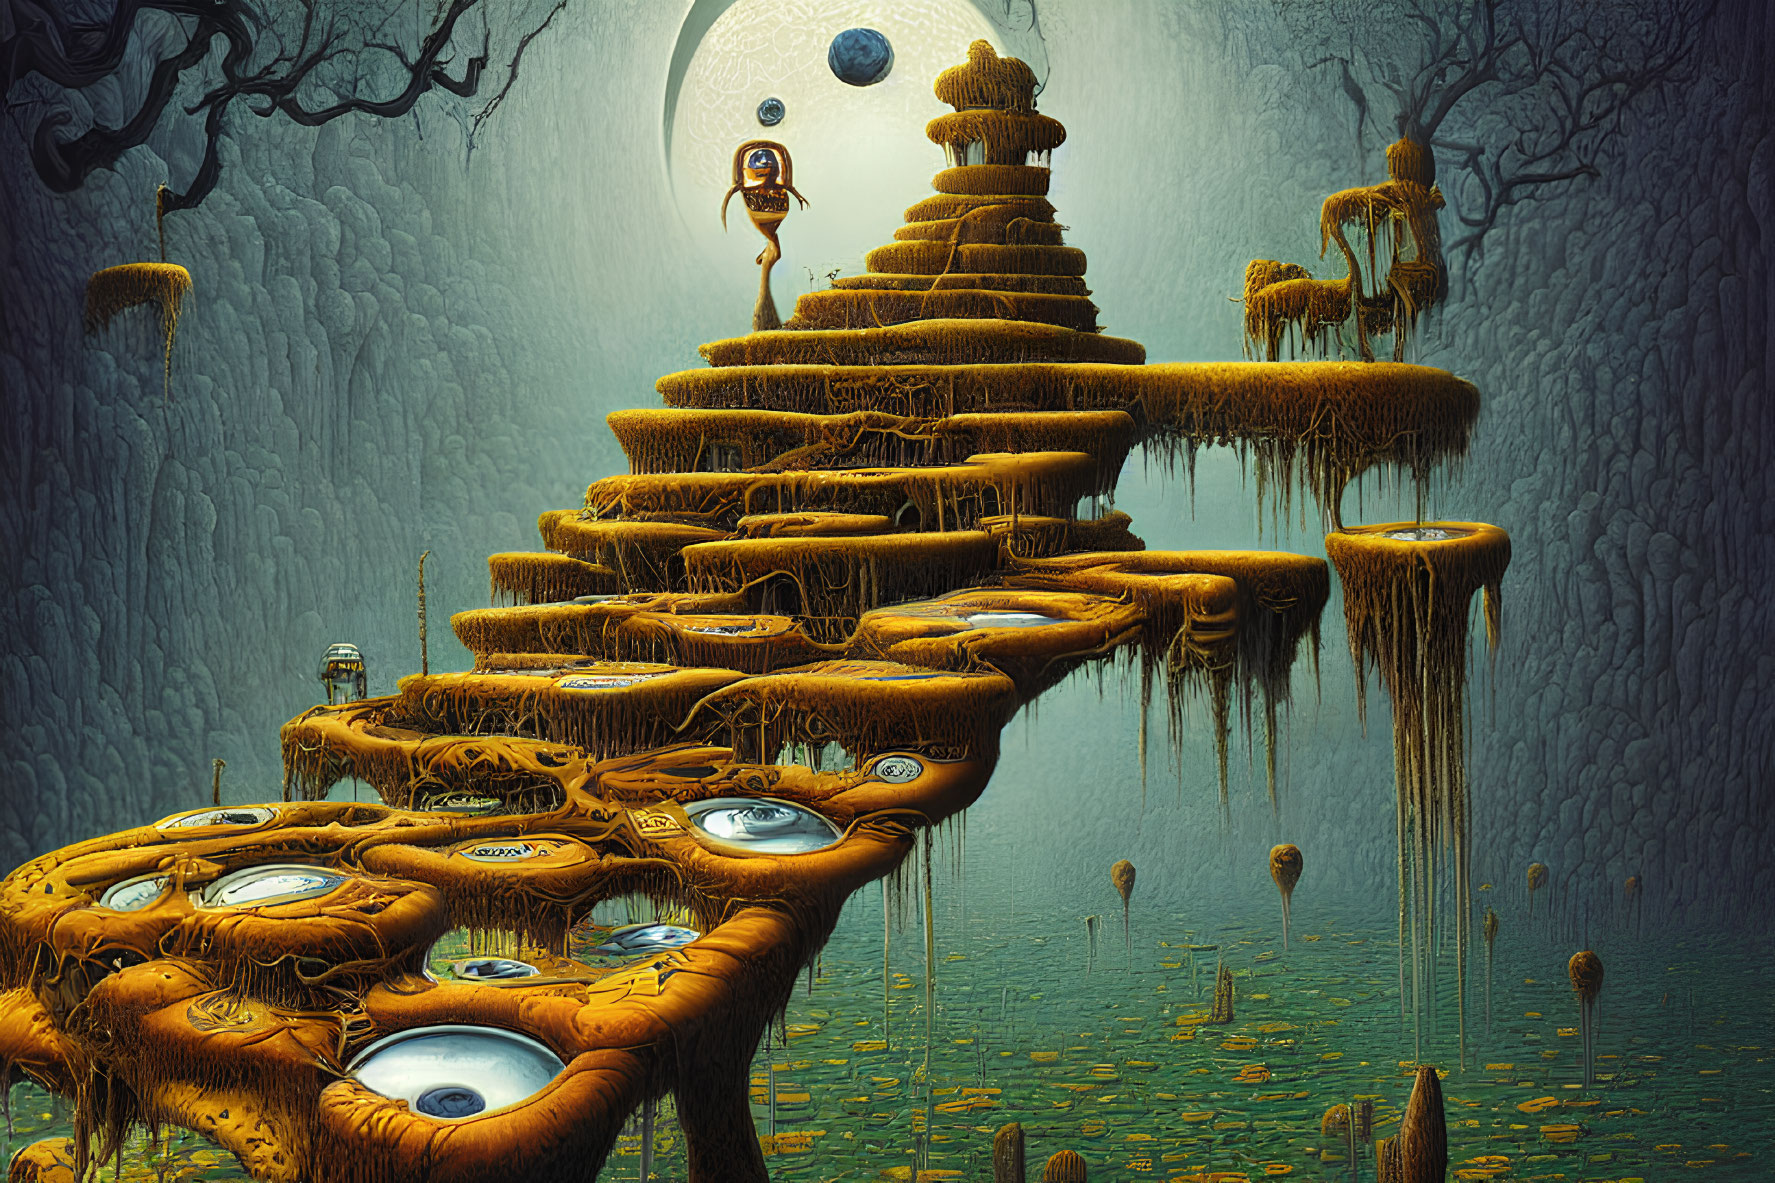 Surreal landscape with spiraling staircase, eyes, door in sky, orbs, and trees